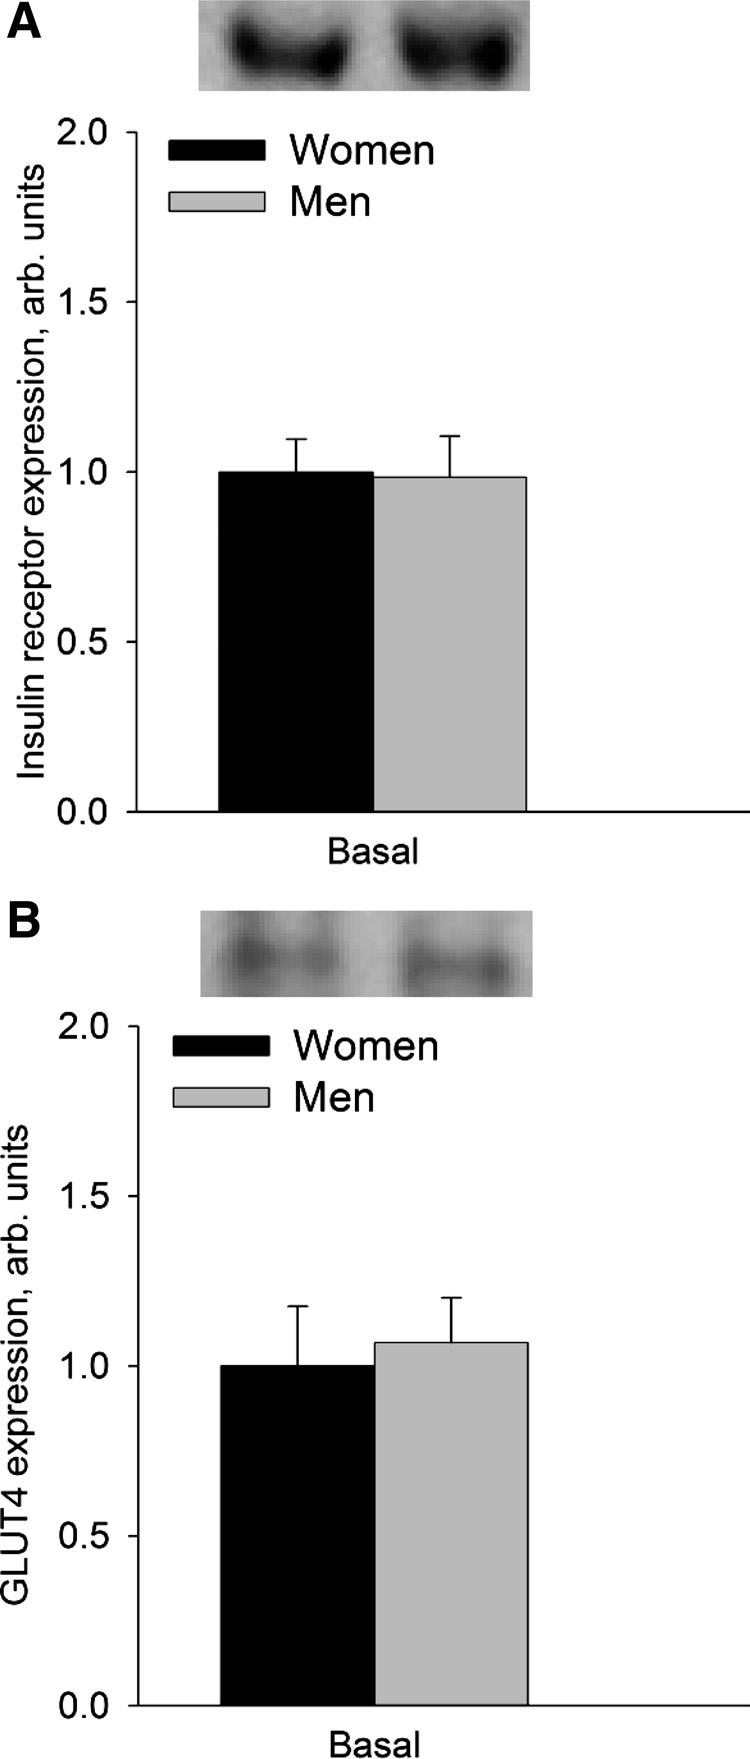 828 SEX AND INSULIN SENSITIVITY Muscle glycogen. The glycogen concentration in the vastus lateralis muscle did not differ between women and men (NS; Fig. 2B). Muscle glycogen increased 8% (P 0.